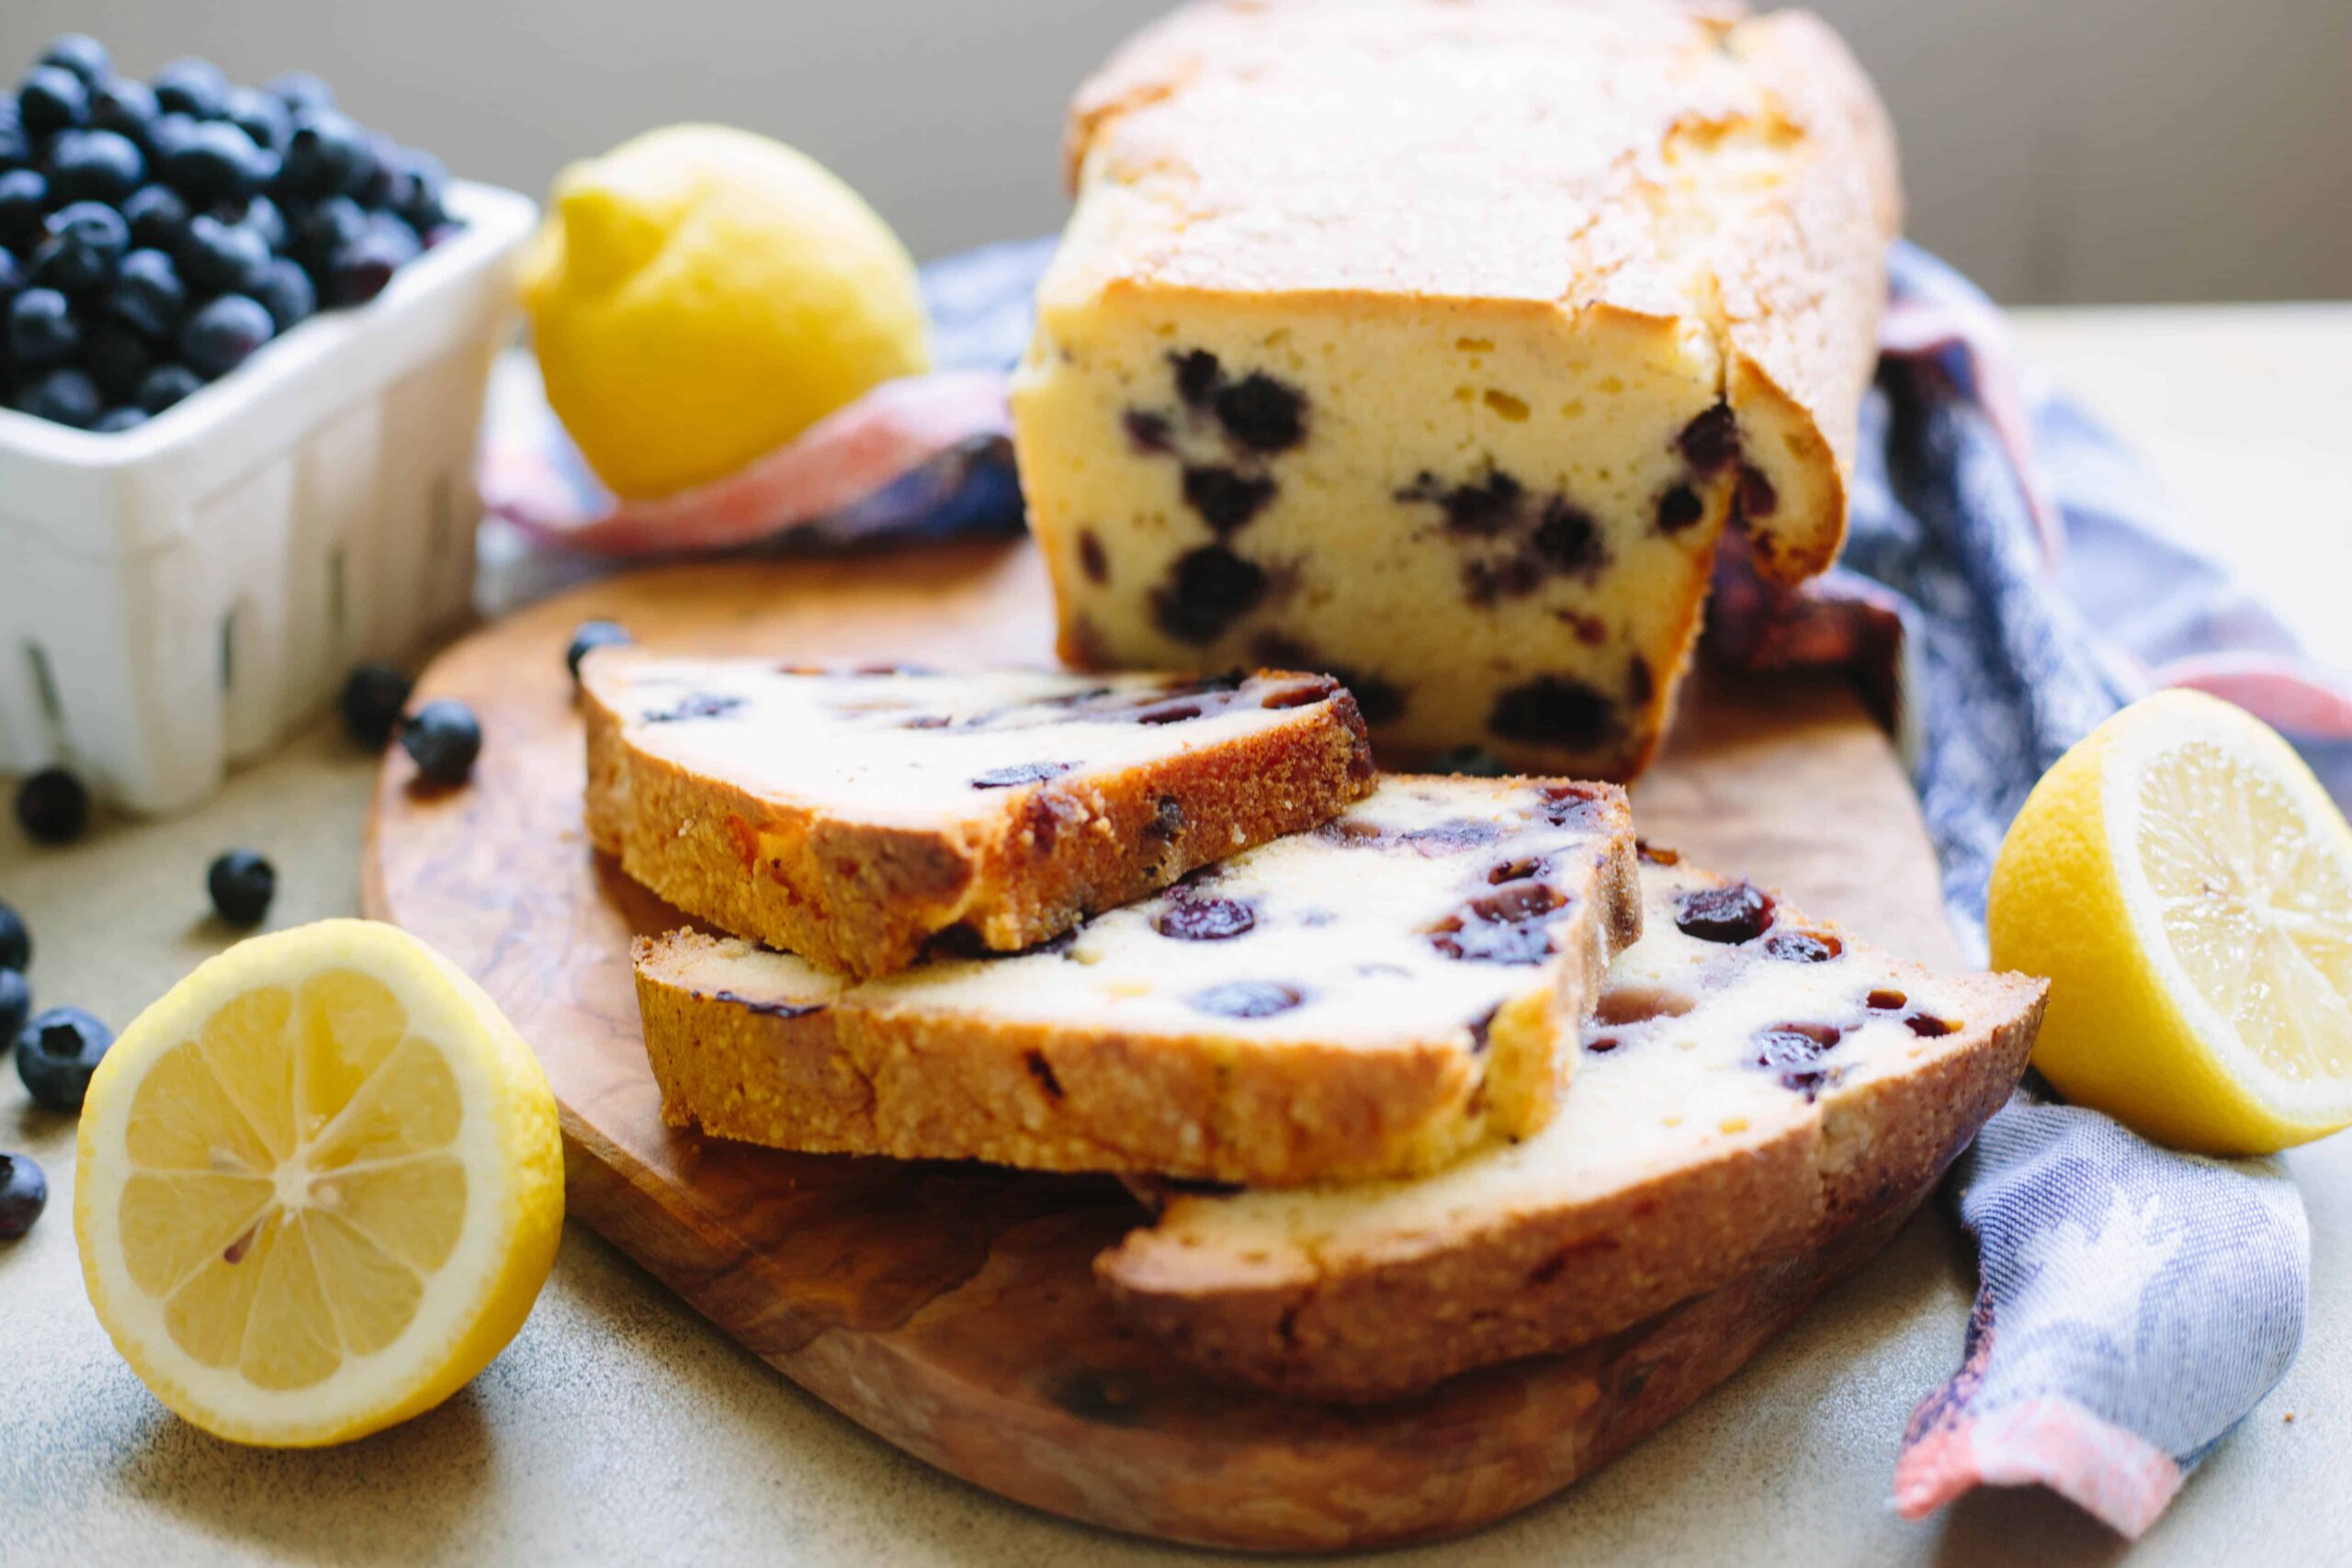 Lemon blueberry pound cake slices on a wood cutting board.